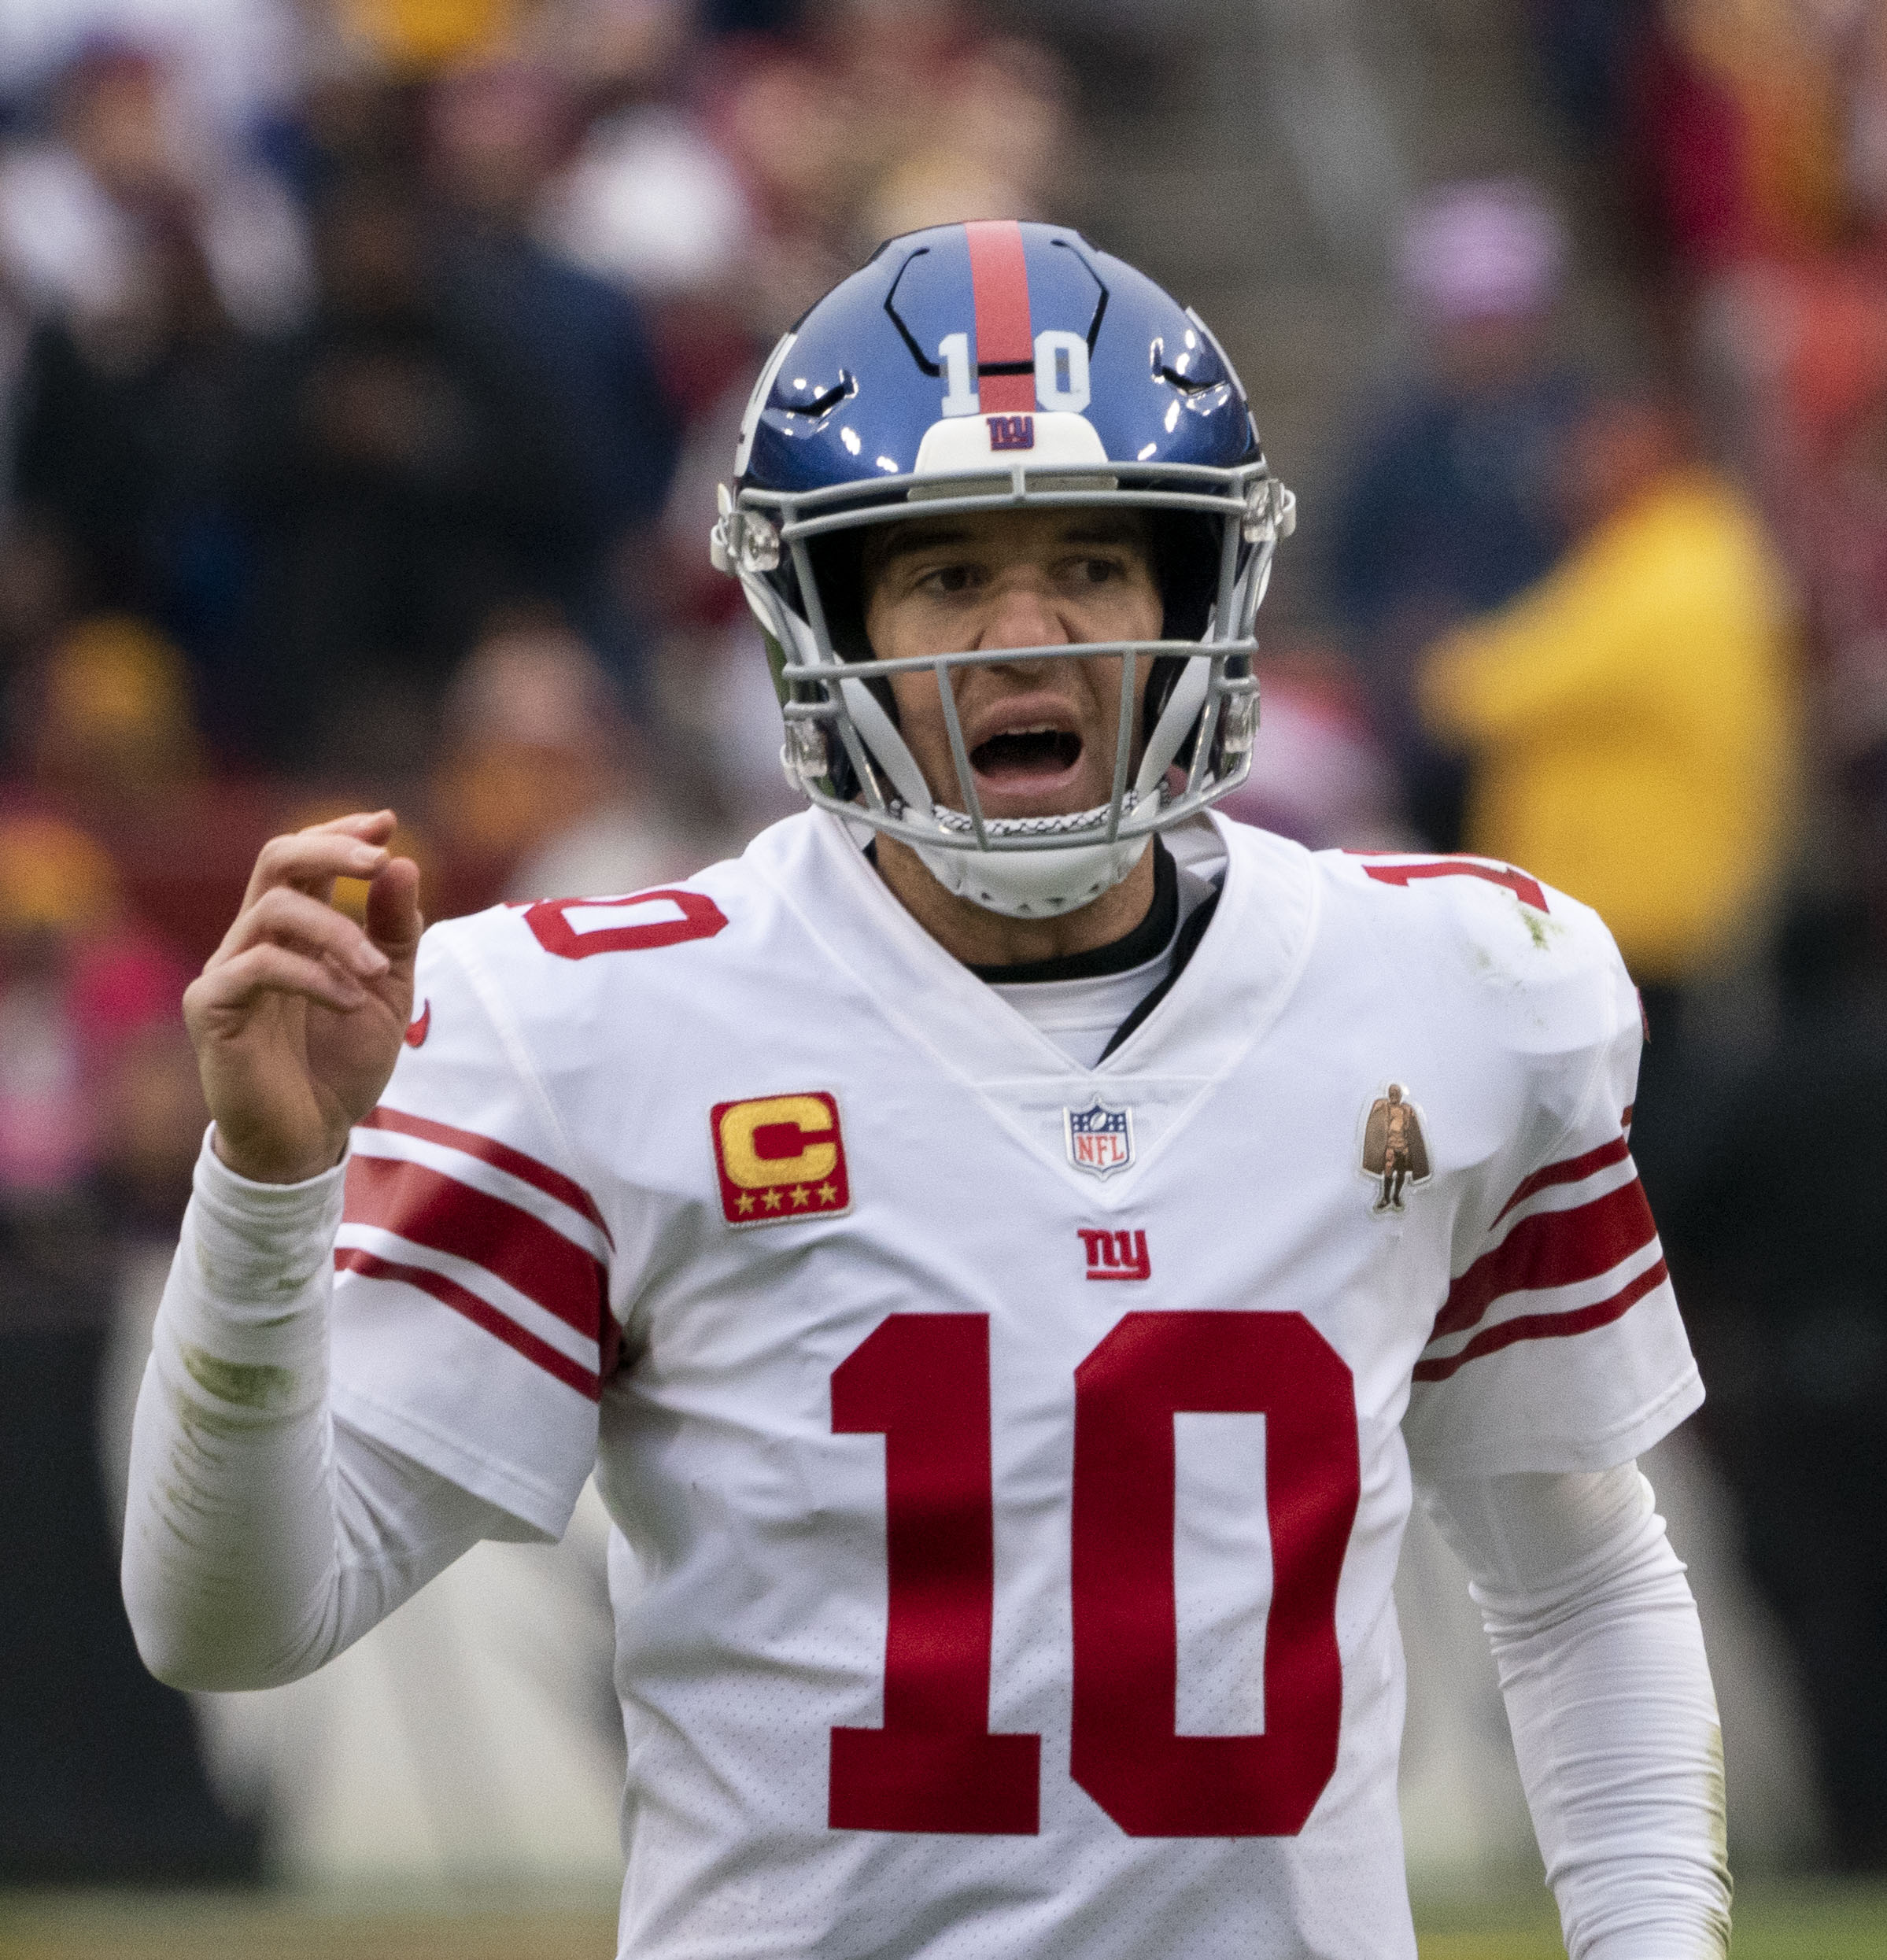 New York Giants Icon Eli Manning Announces his Retirement After 16 Years